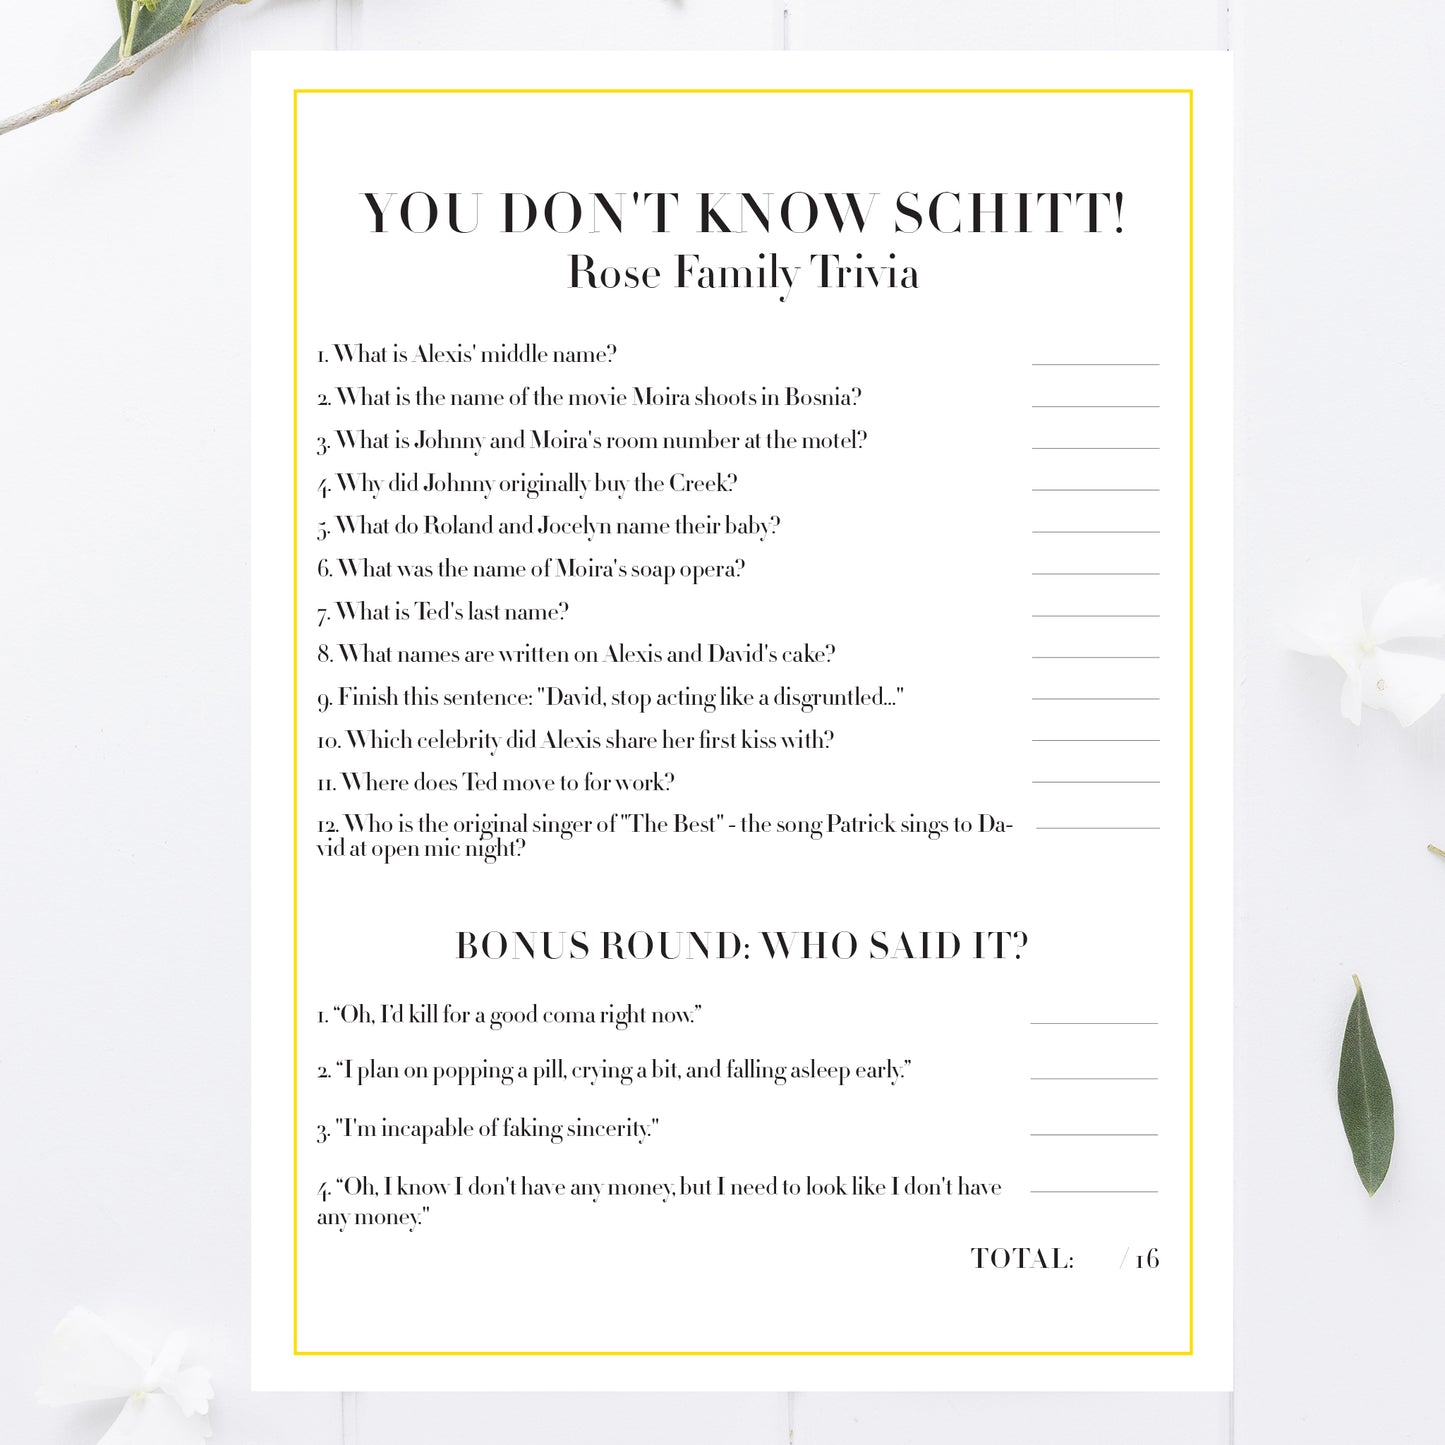 Schitts Party Trivia Game Printable